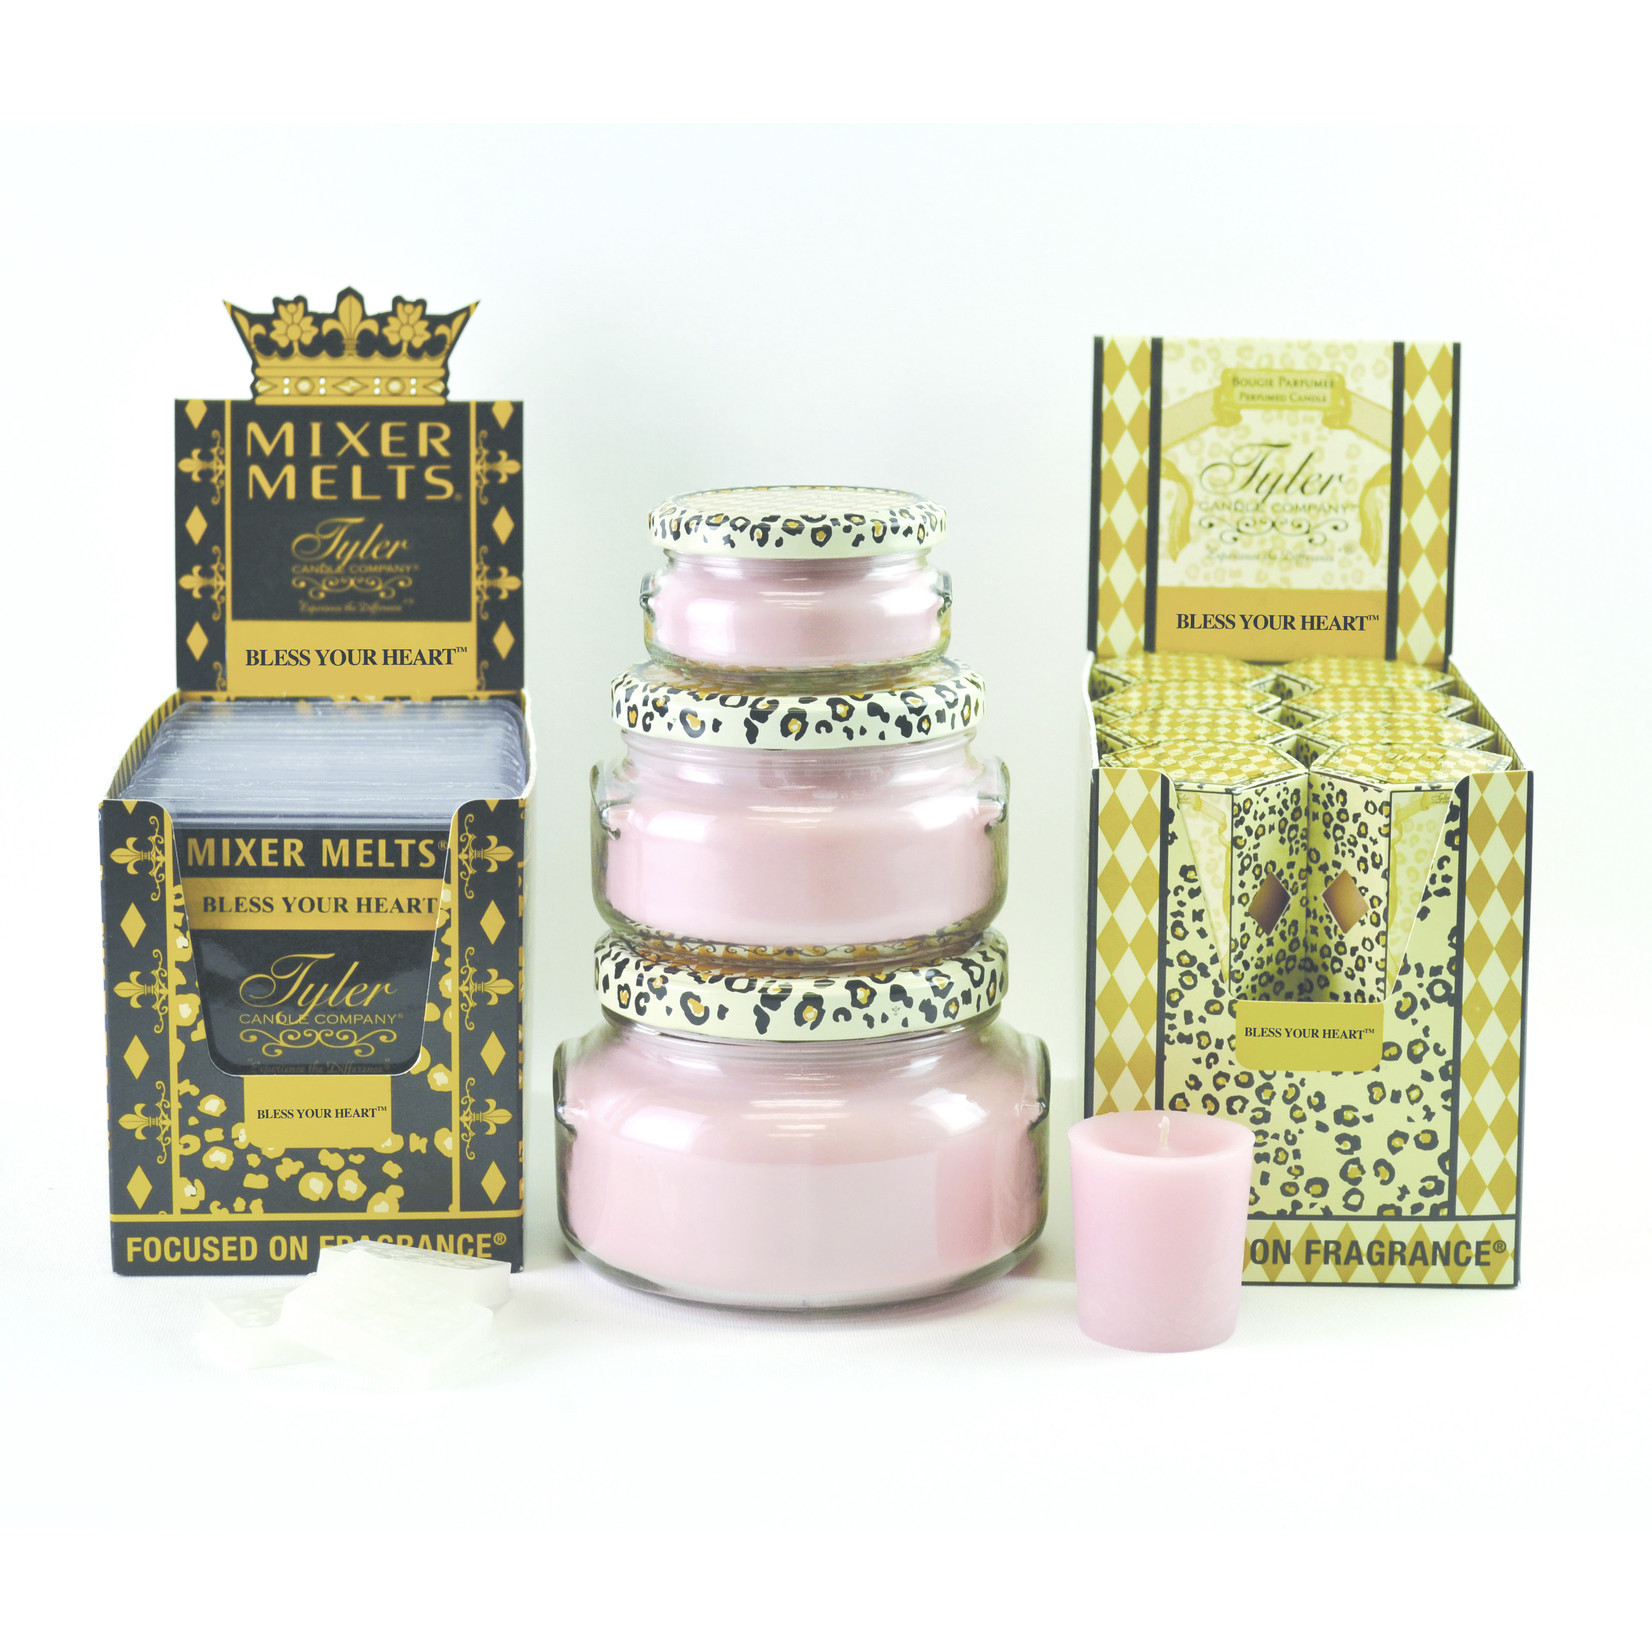 TYLER CANDLE CO MIXER MELTS ENTITLED – The Chandelier Rose Boutique